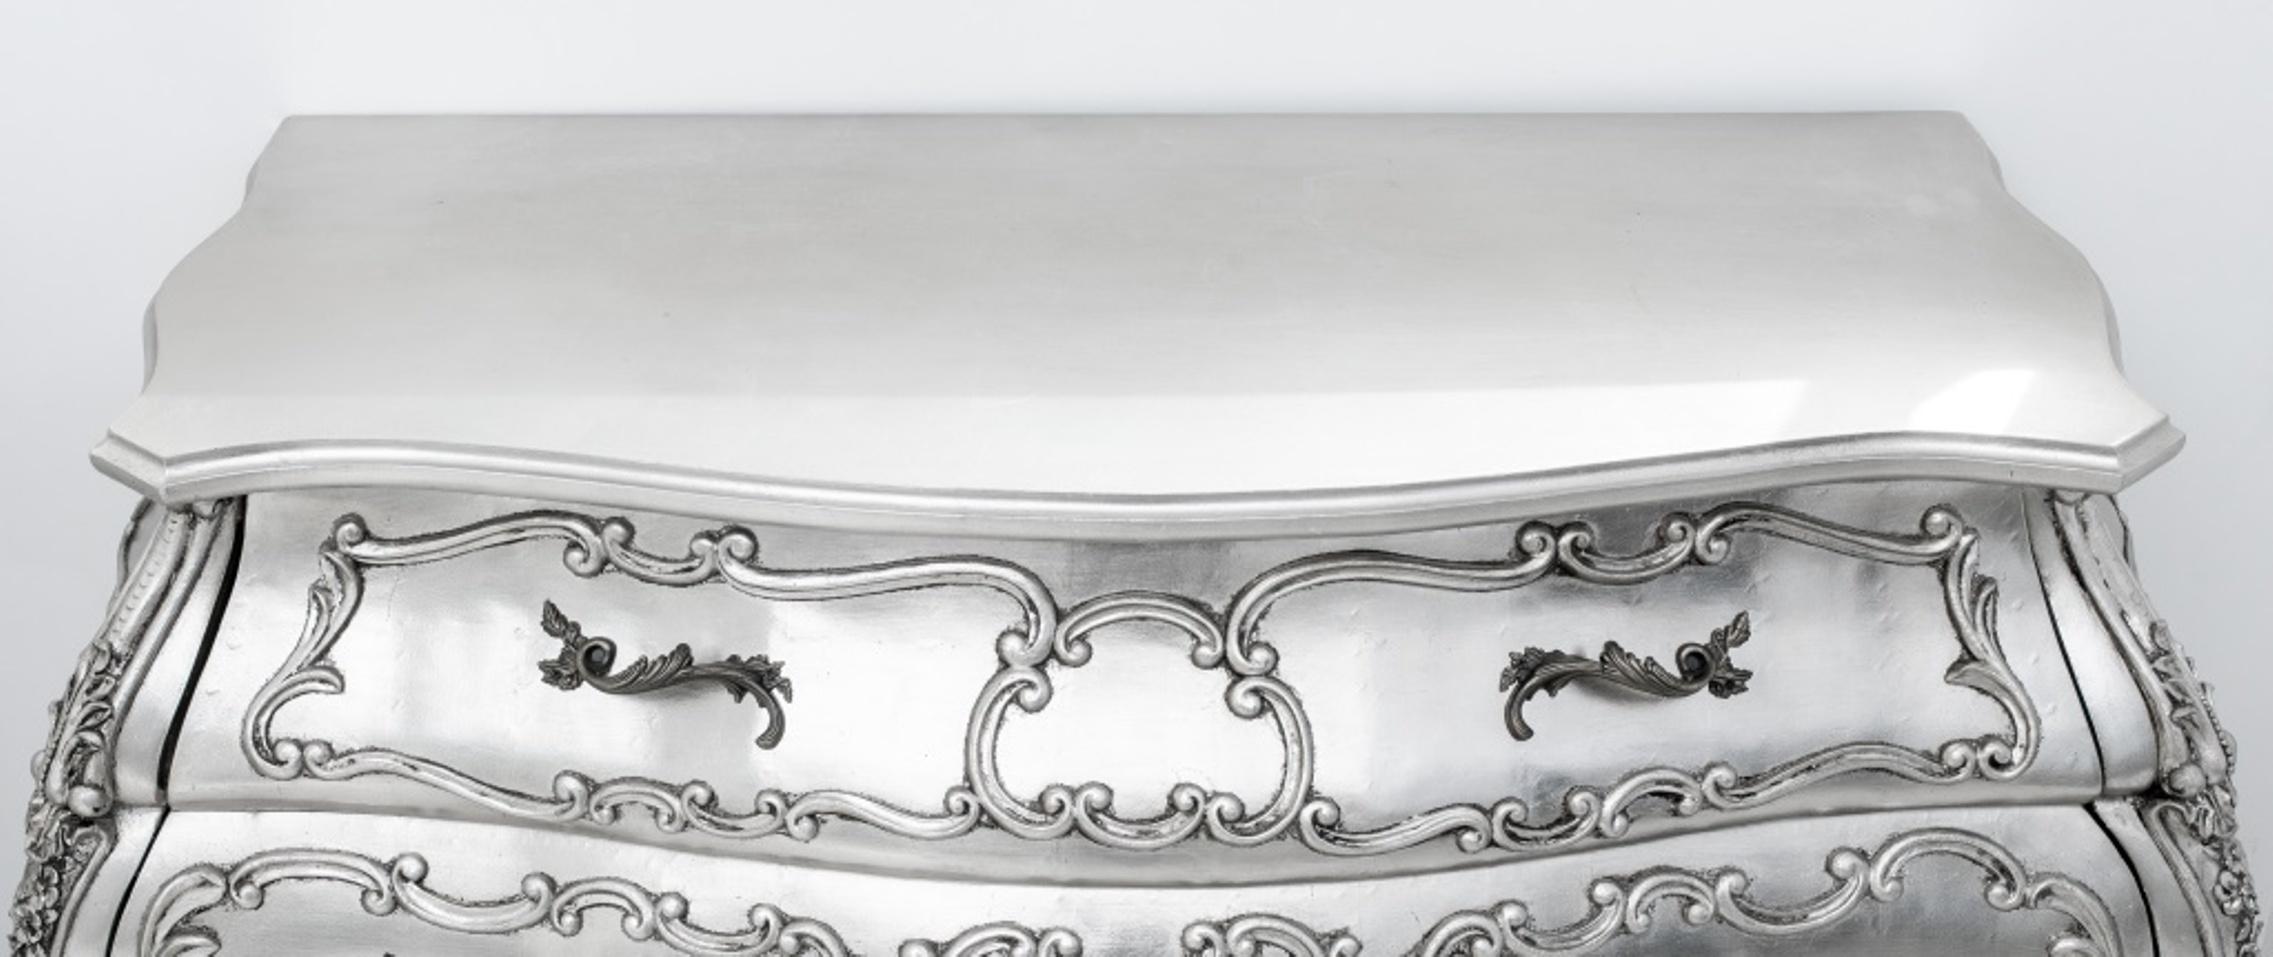 Silvered Hollywood Regency Rococo Revival Commodes, Pair For Sale